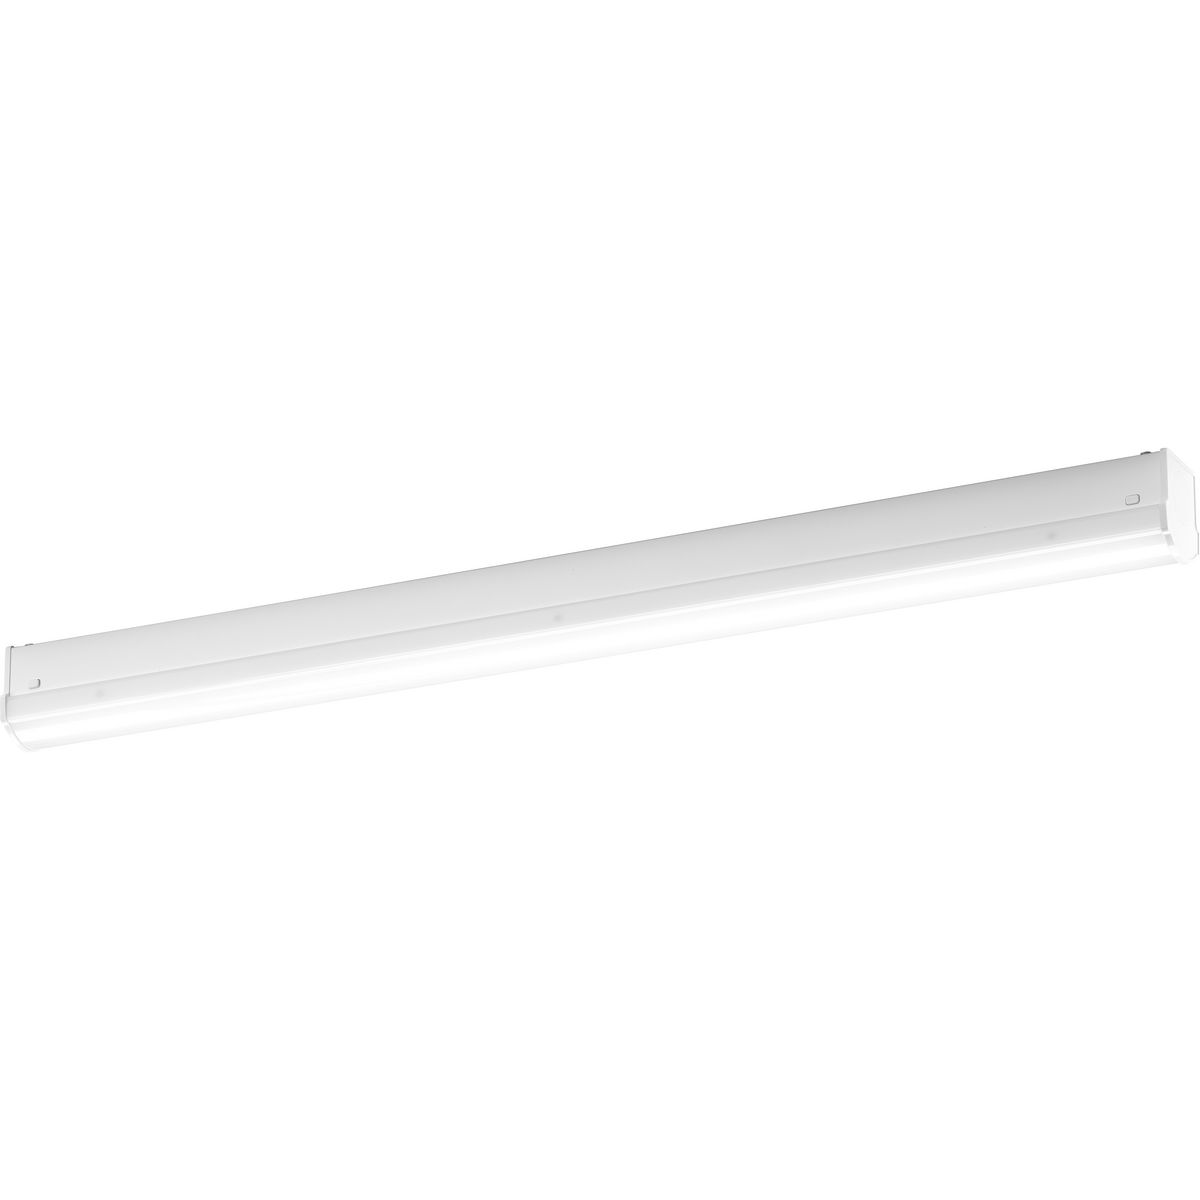 Integrated 2ft strip light. Great for utility rooms, garages and workrooms. Long lasting LED lights. 1508 lumens, 80 lumens per watt (delivered). 3000K ENERGY STAR.